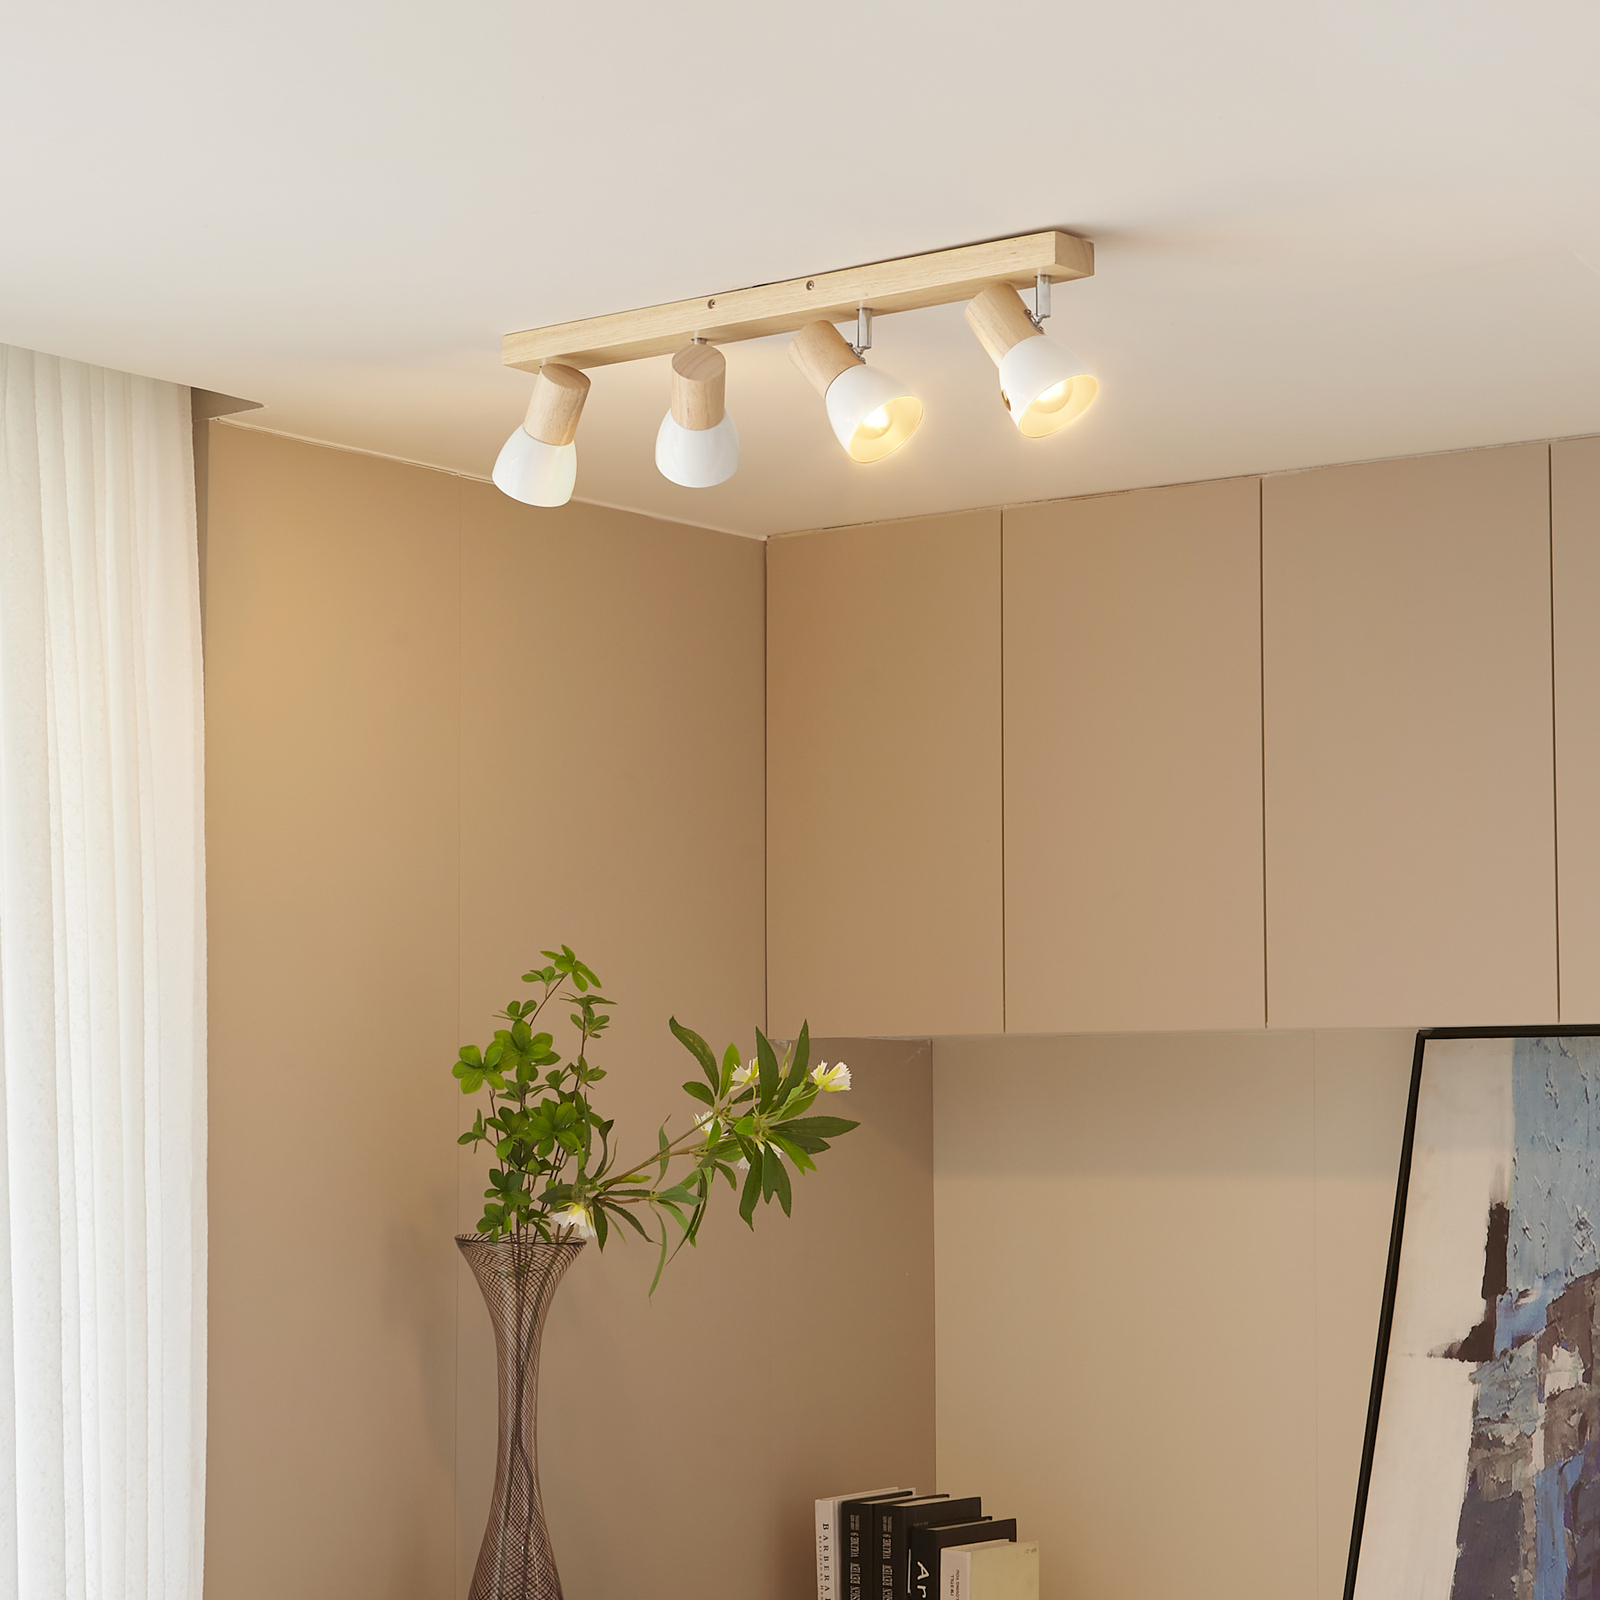 Wood ceiling spotlight Thorin with white shades